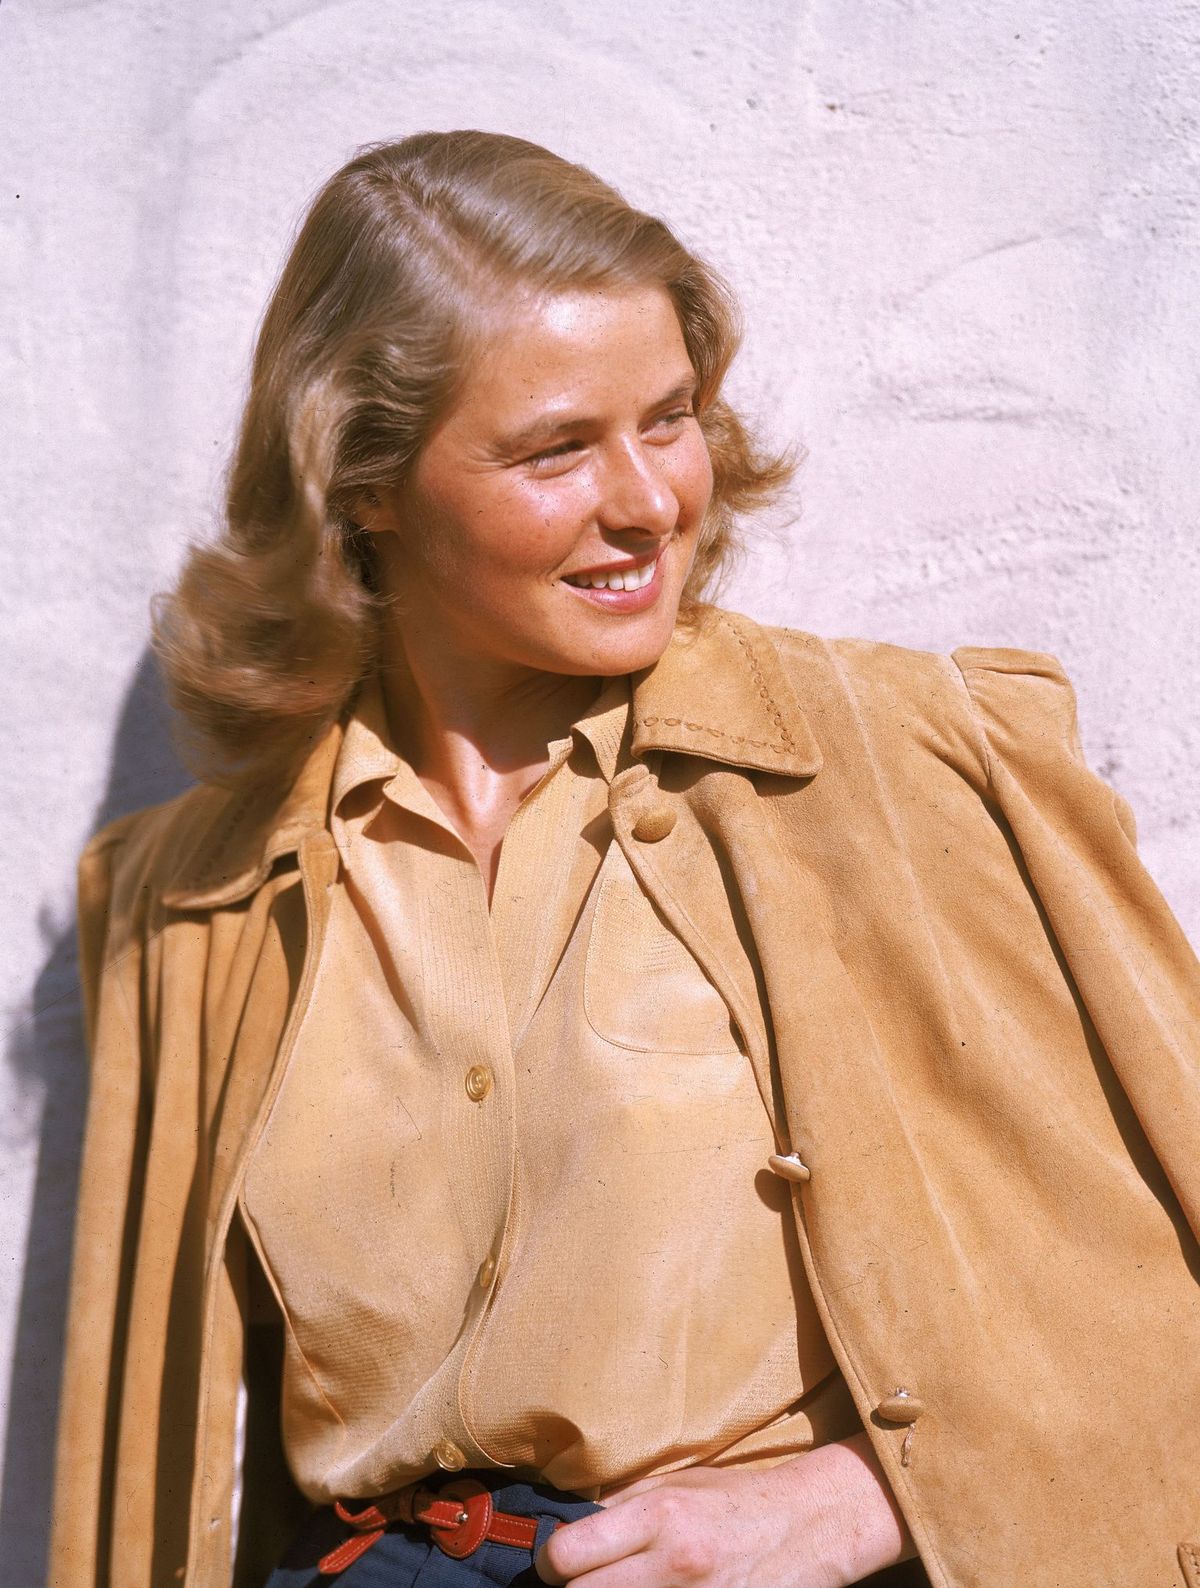 Ingrid Bergman smiles as she poses outdoors, wearing a tan leather jacket, on January 1, 1945. | Photo: Getty Images